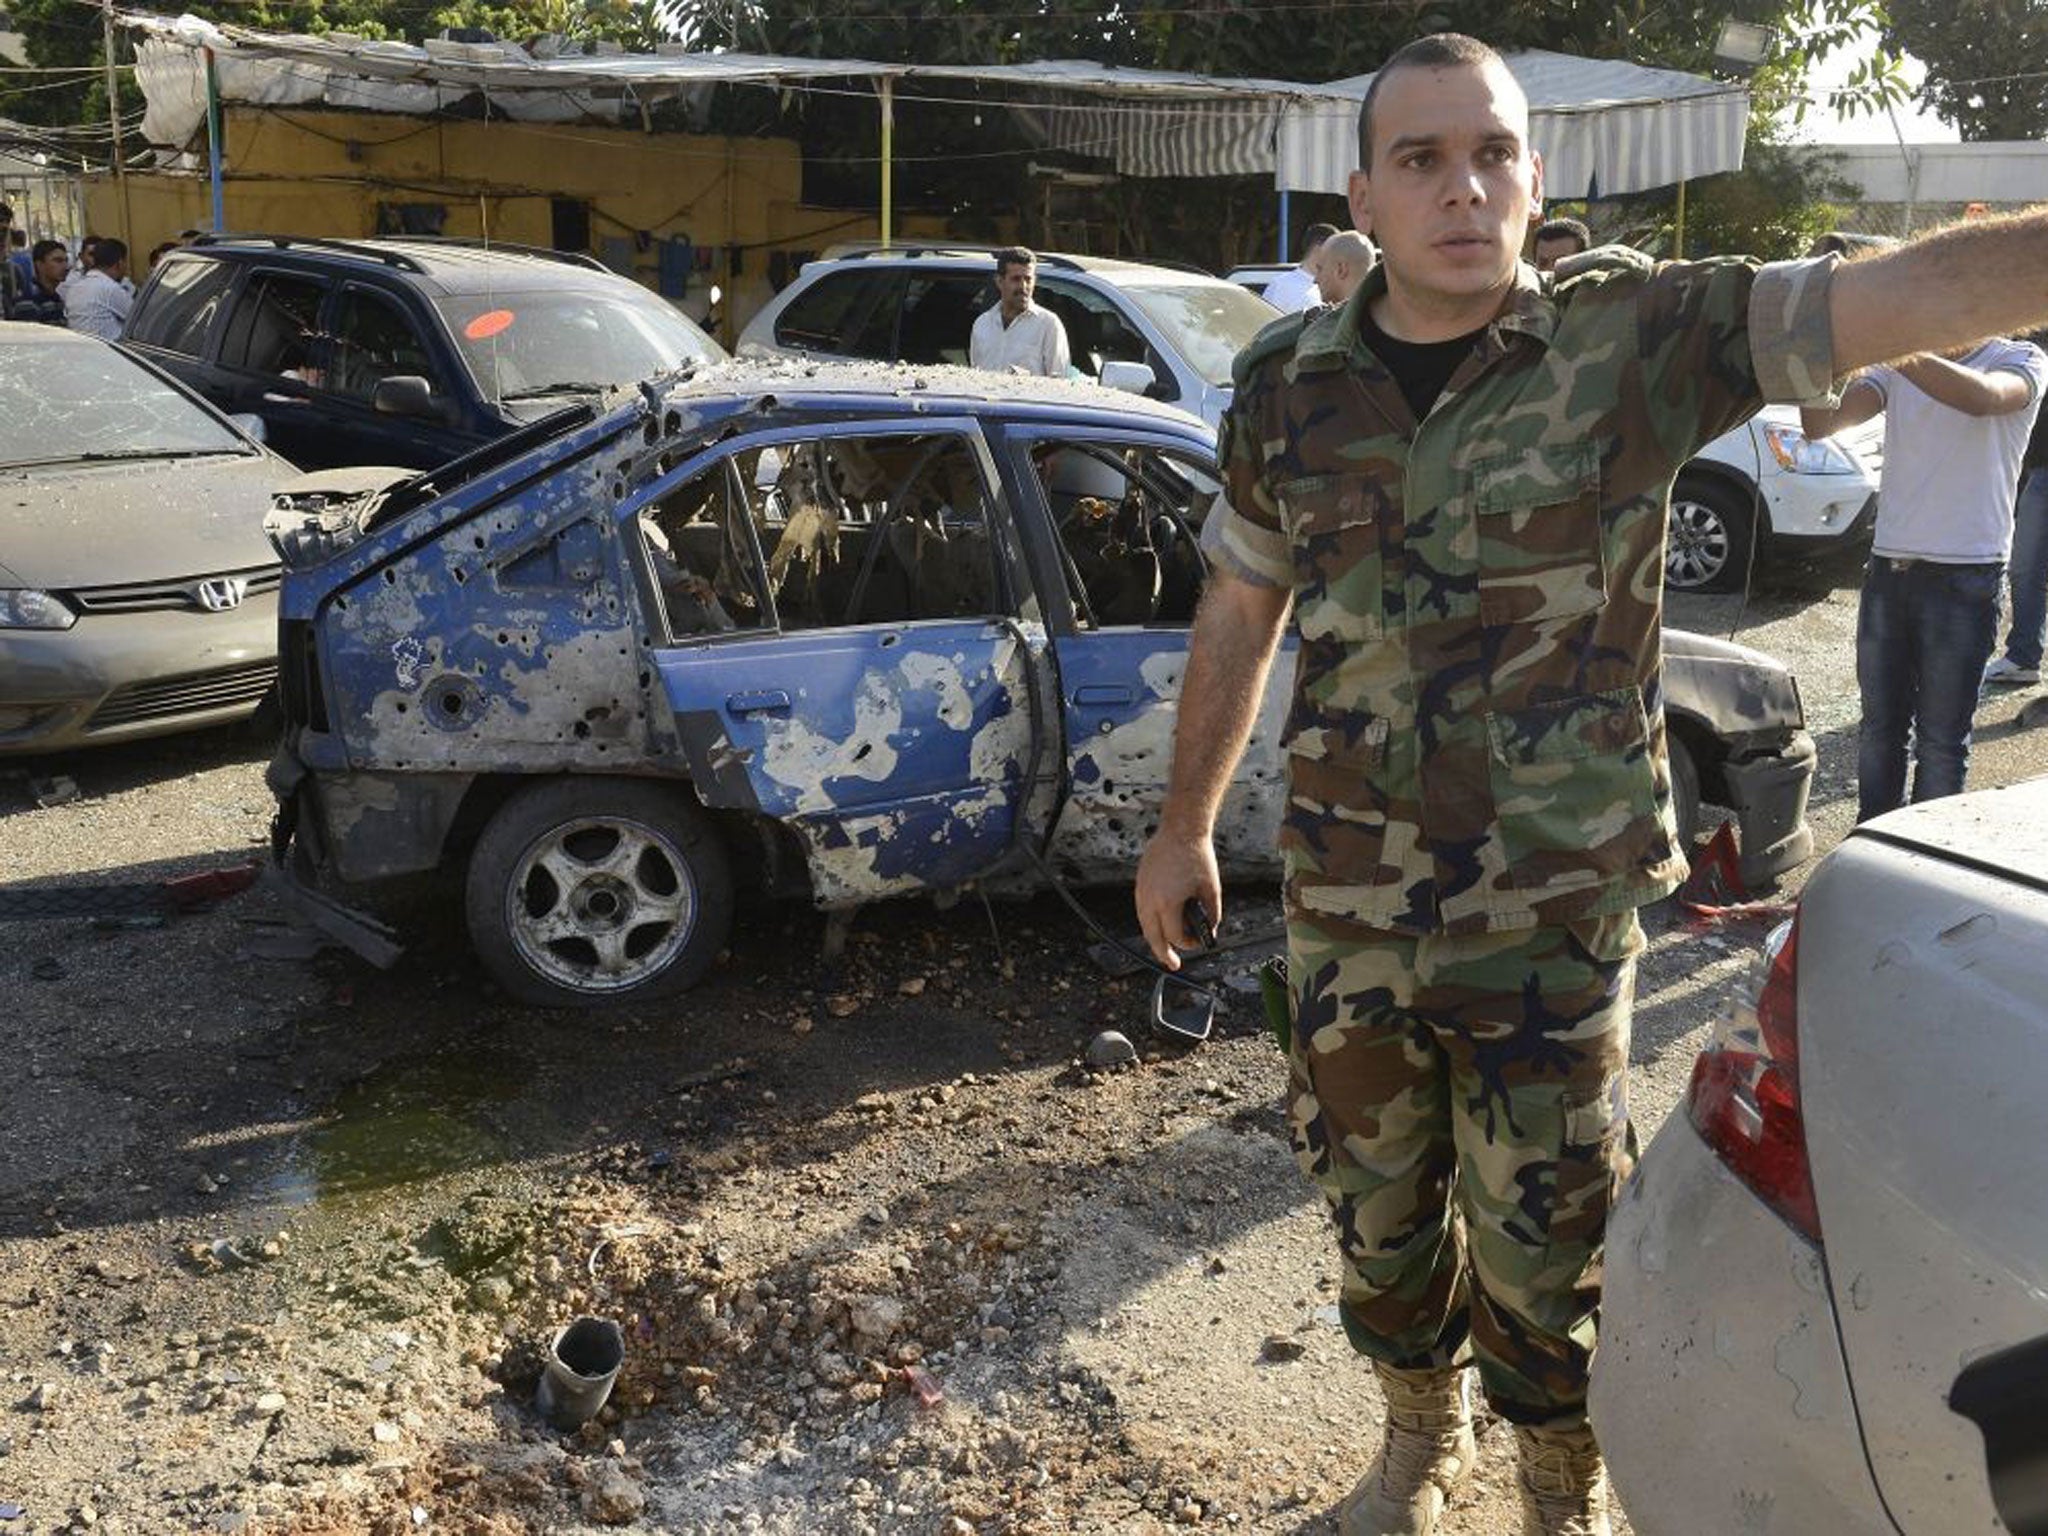 A Lebanese army officer stands next to a damaged car as he asks journalists to step back, at the scene where a rocket struck a car exhibit